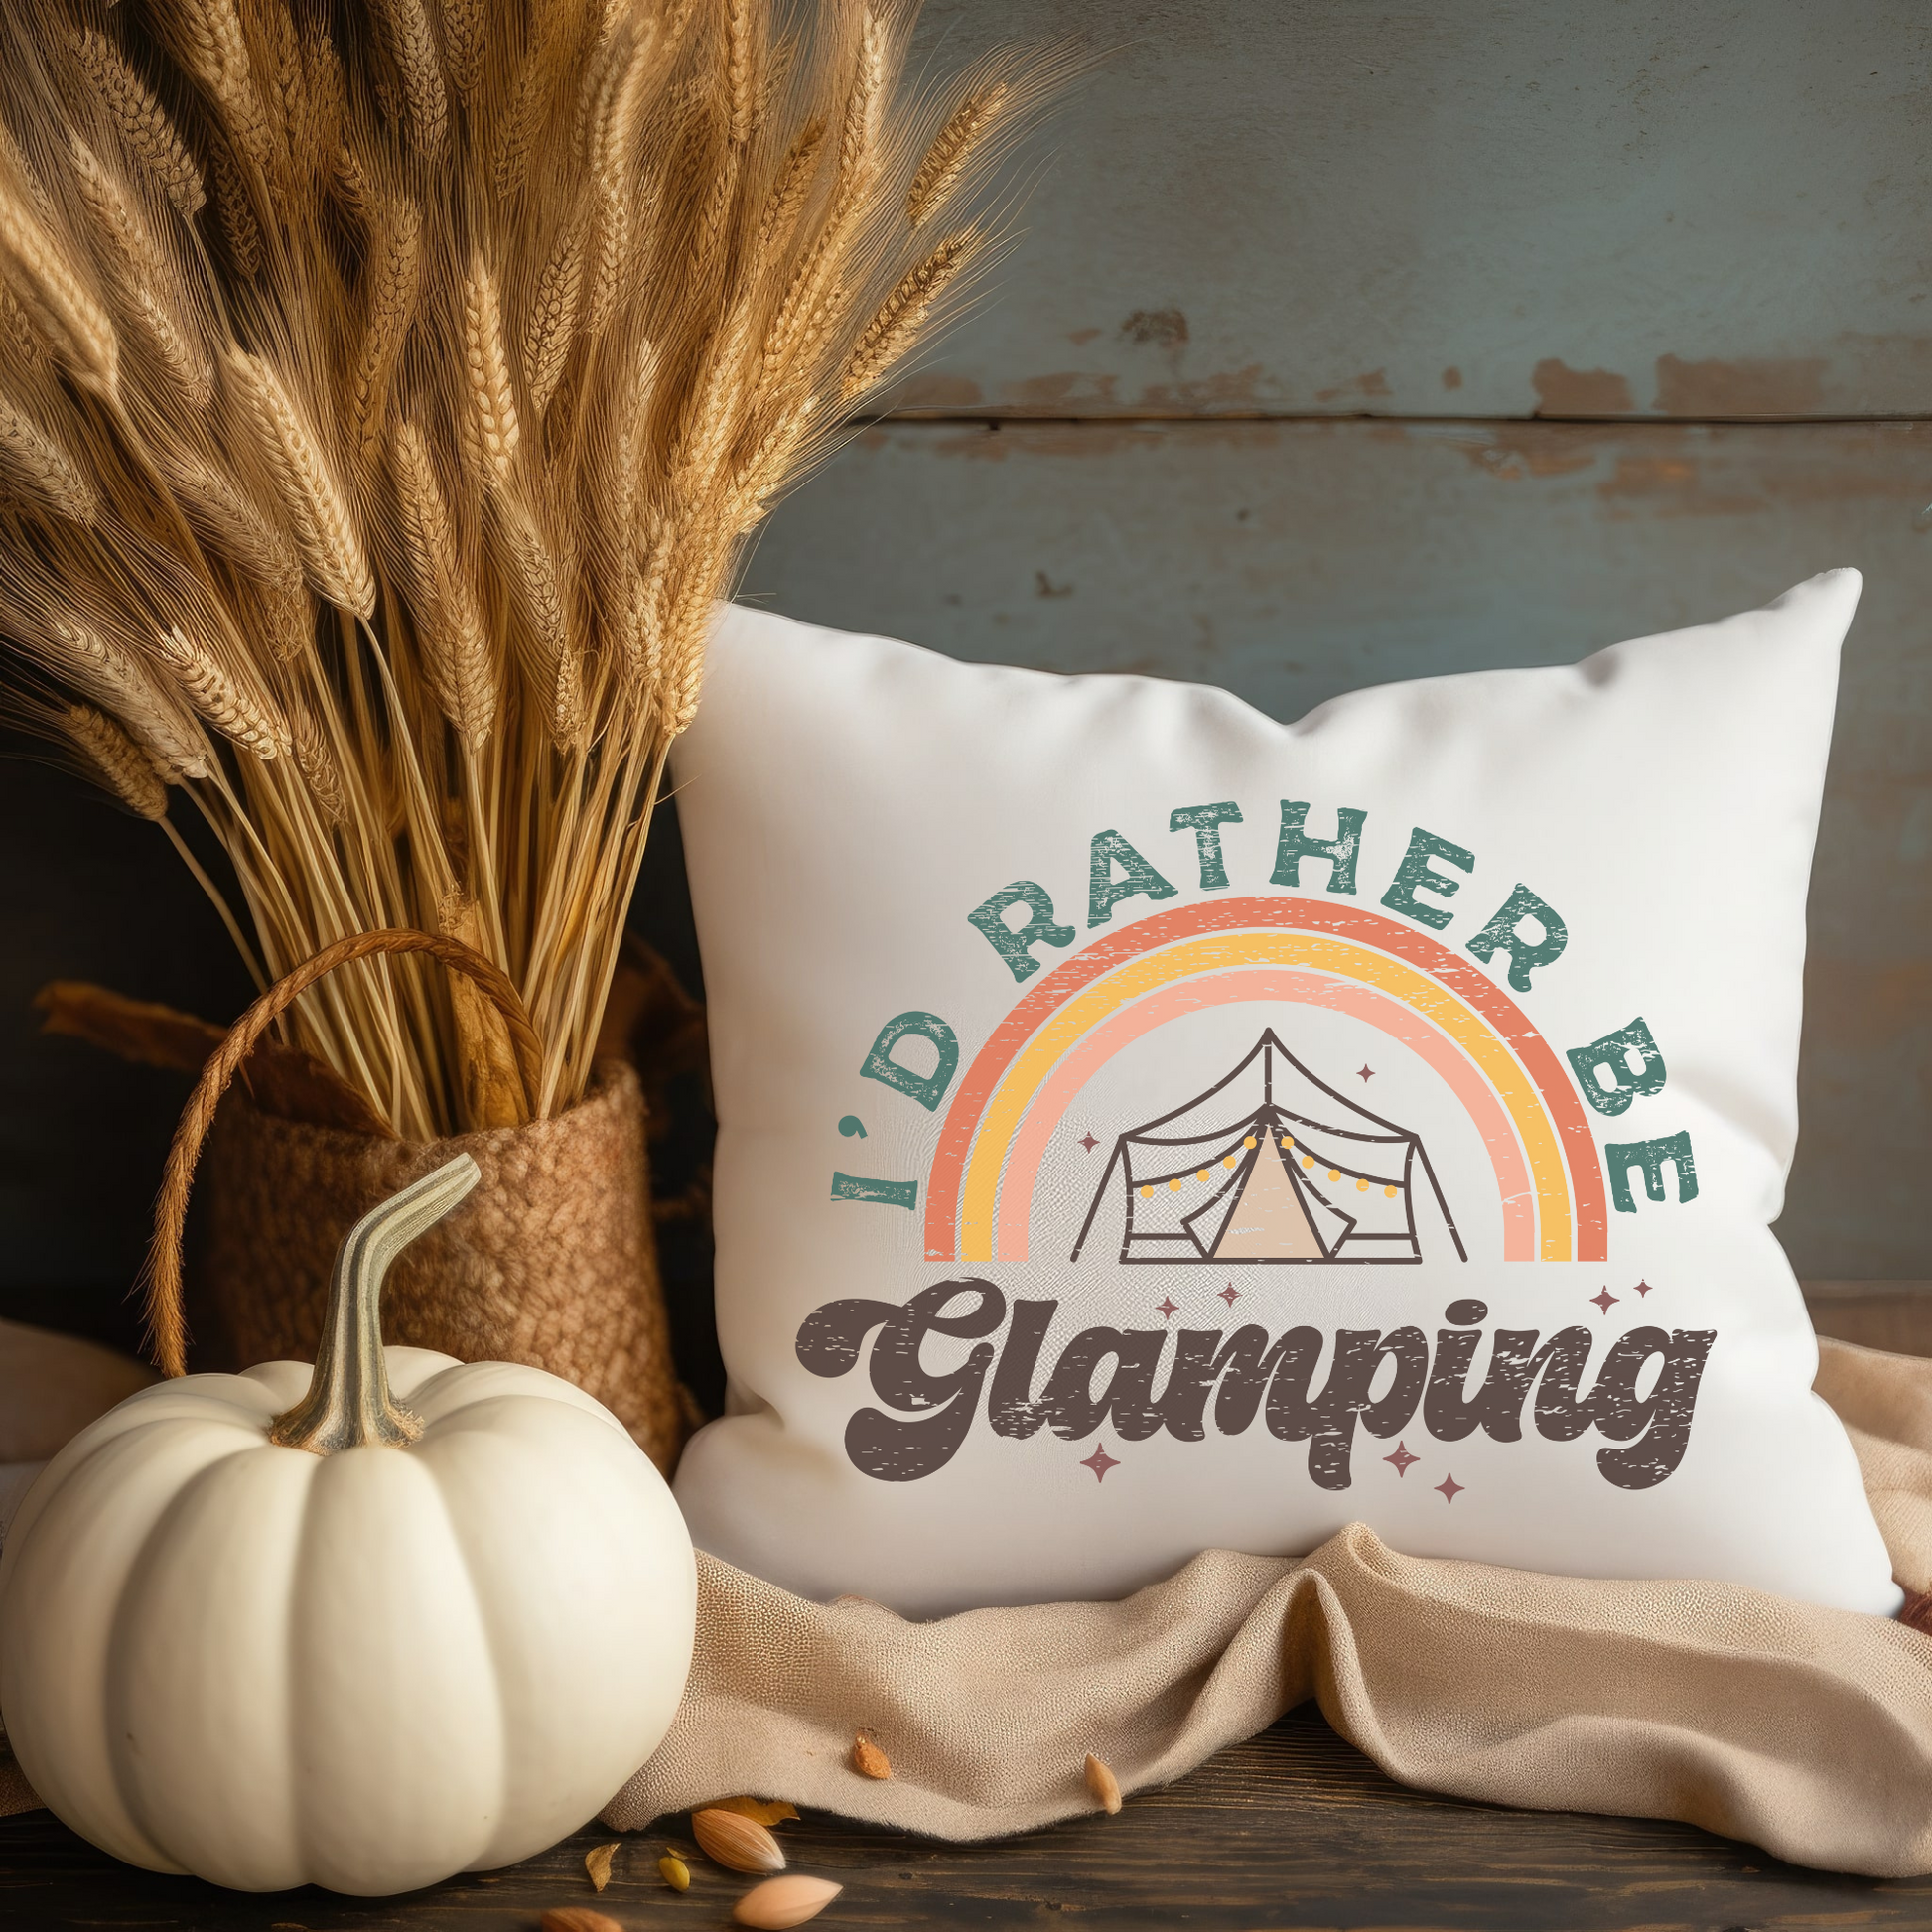 Glamping Pillow RV Camping Pillow Nature Lover Gift Bed Pillow Camping Lover Party Gift - Design Club Home